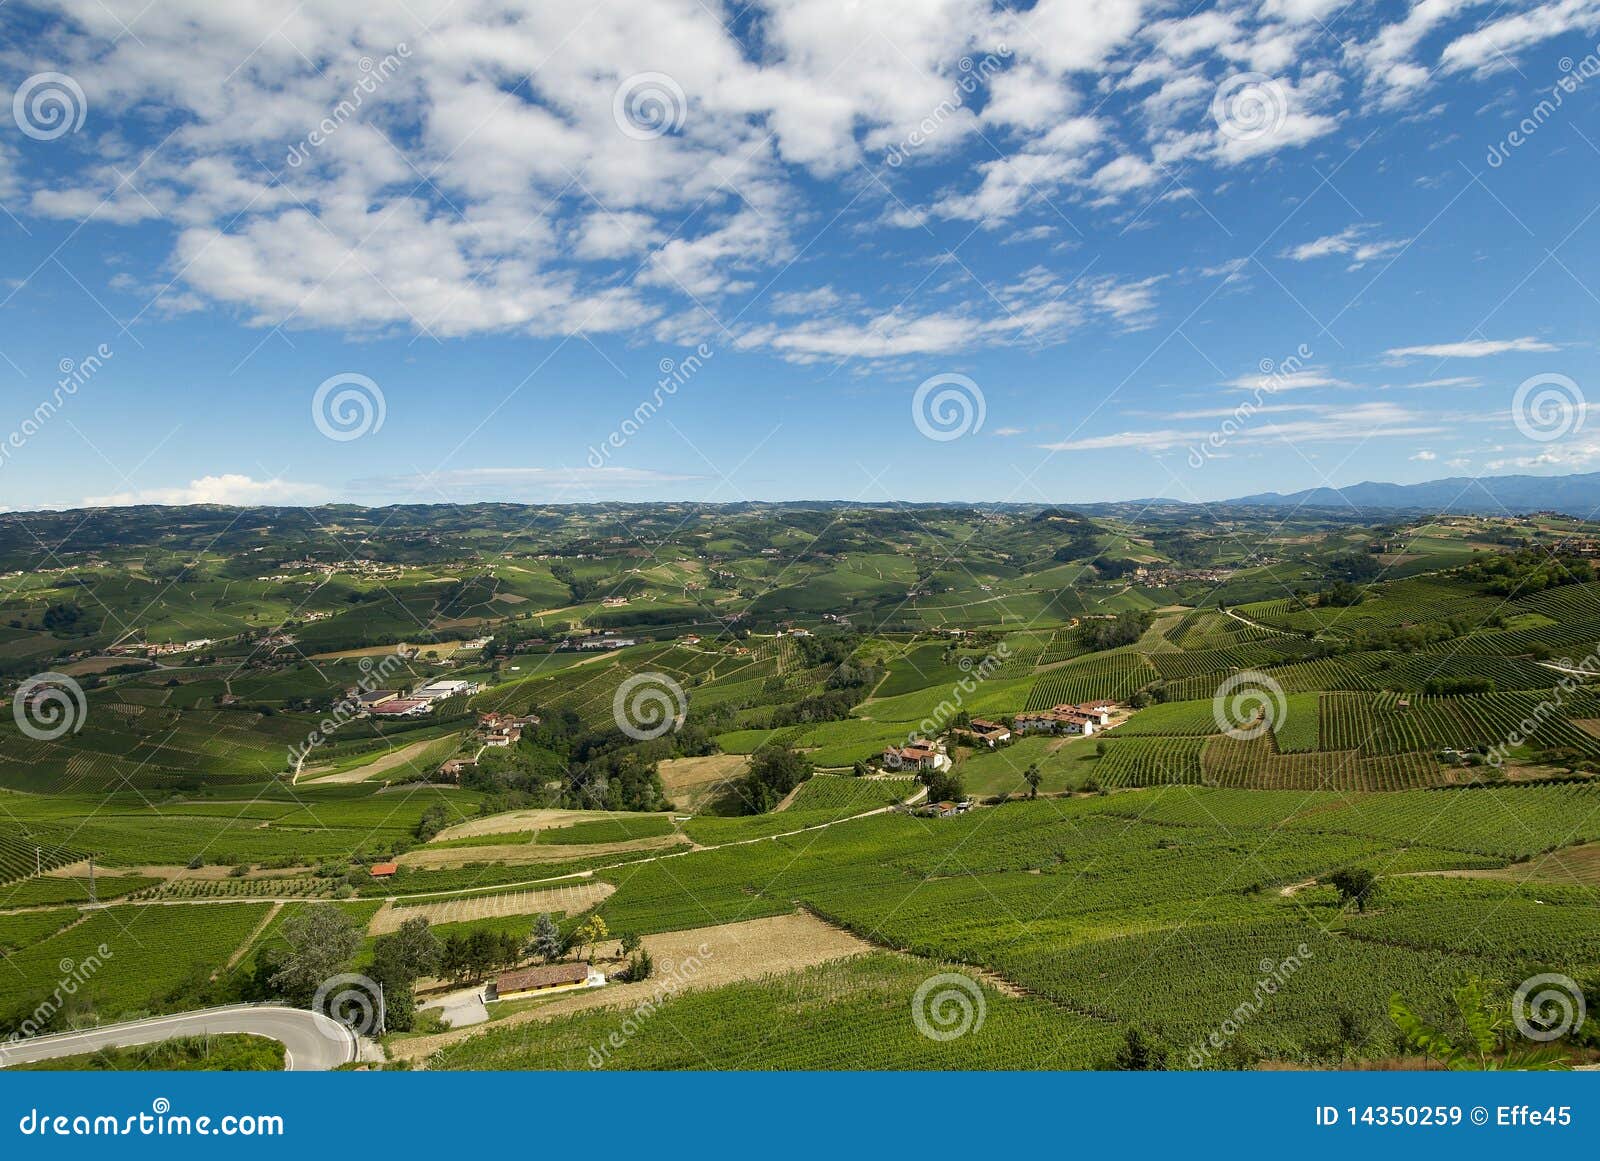 Country landscape in piedmont with blue and cloudy sky.